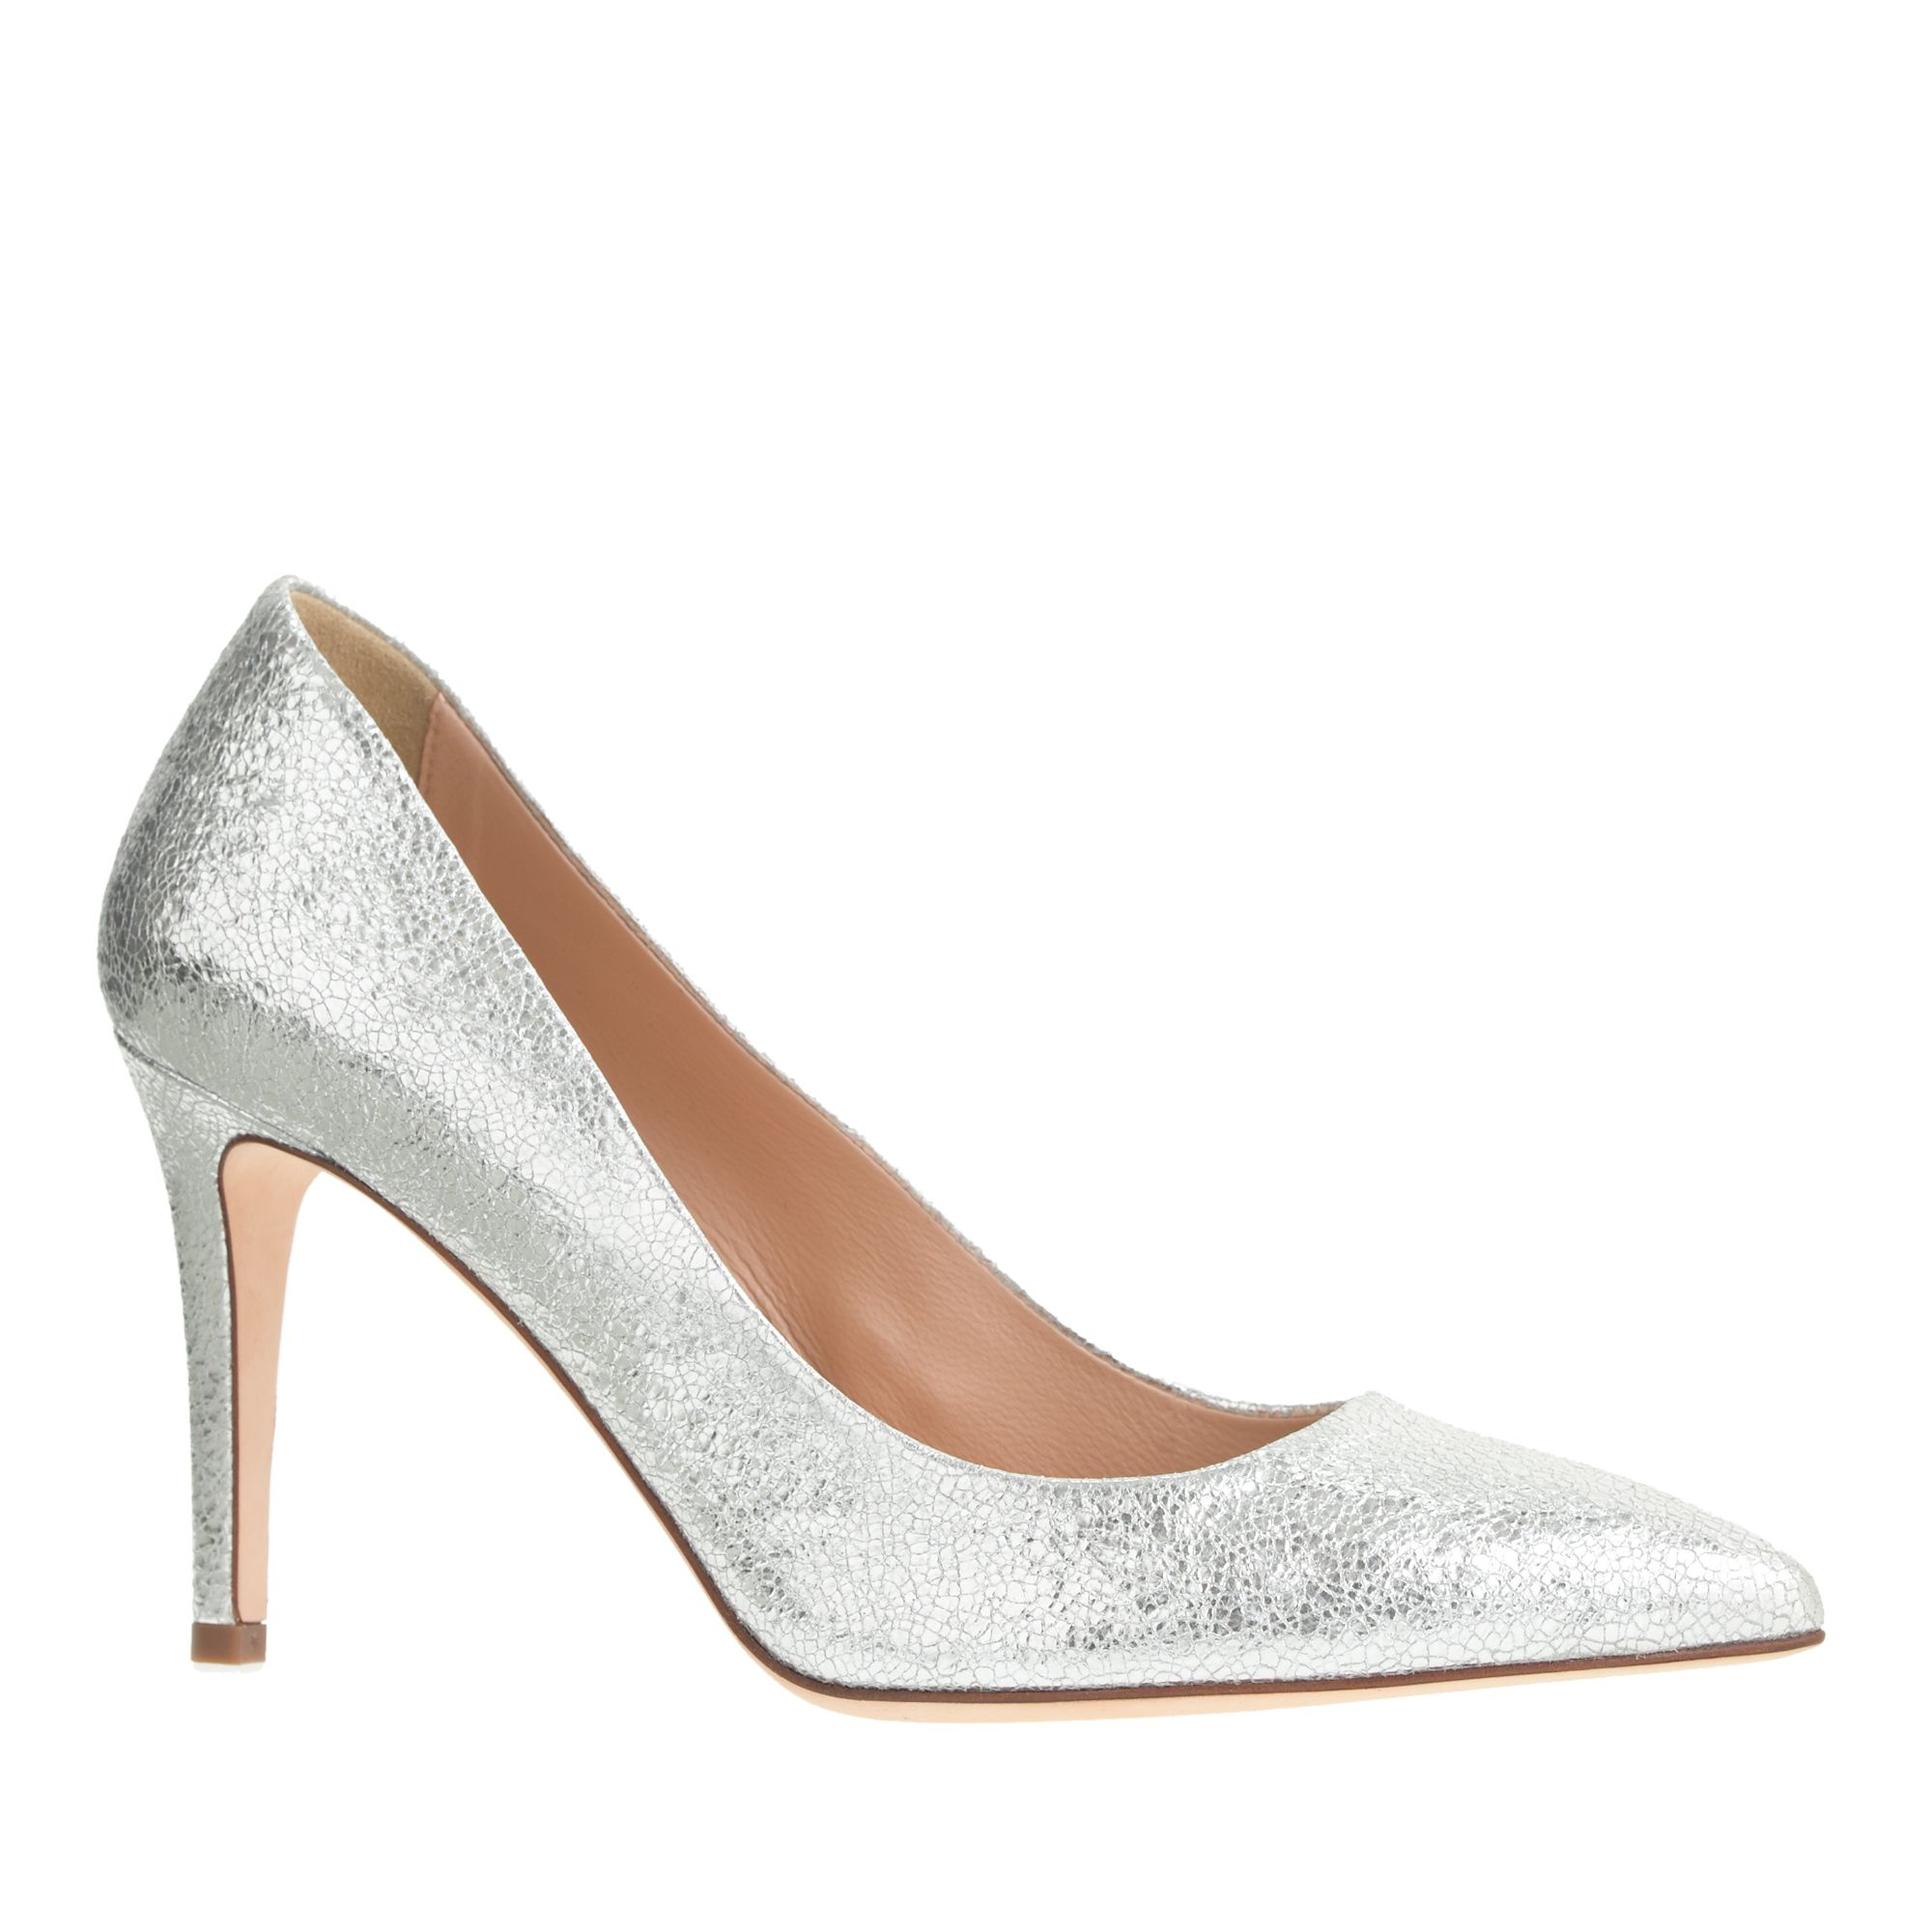 J.crew Everly Crackled Metallic Leather Pumps in Silver (metallic ...